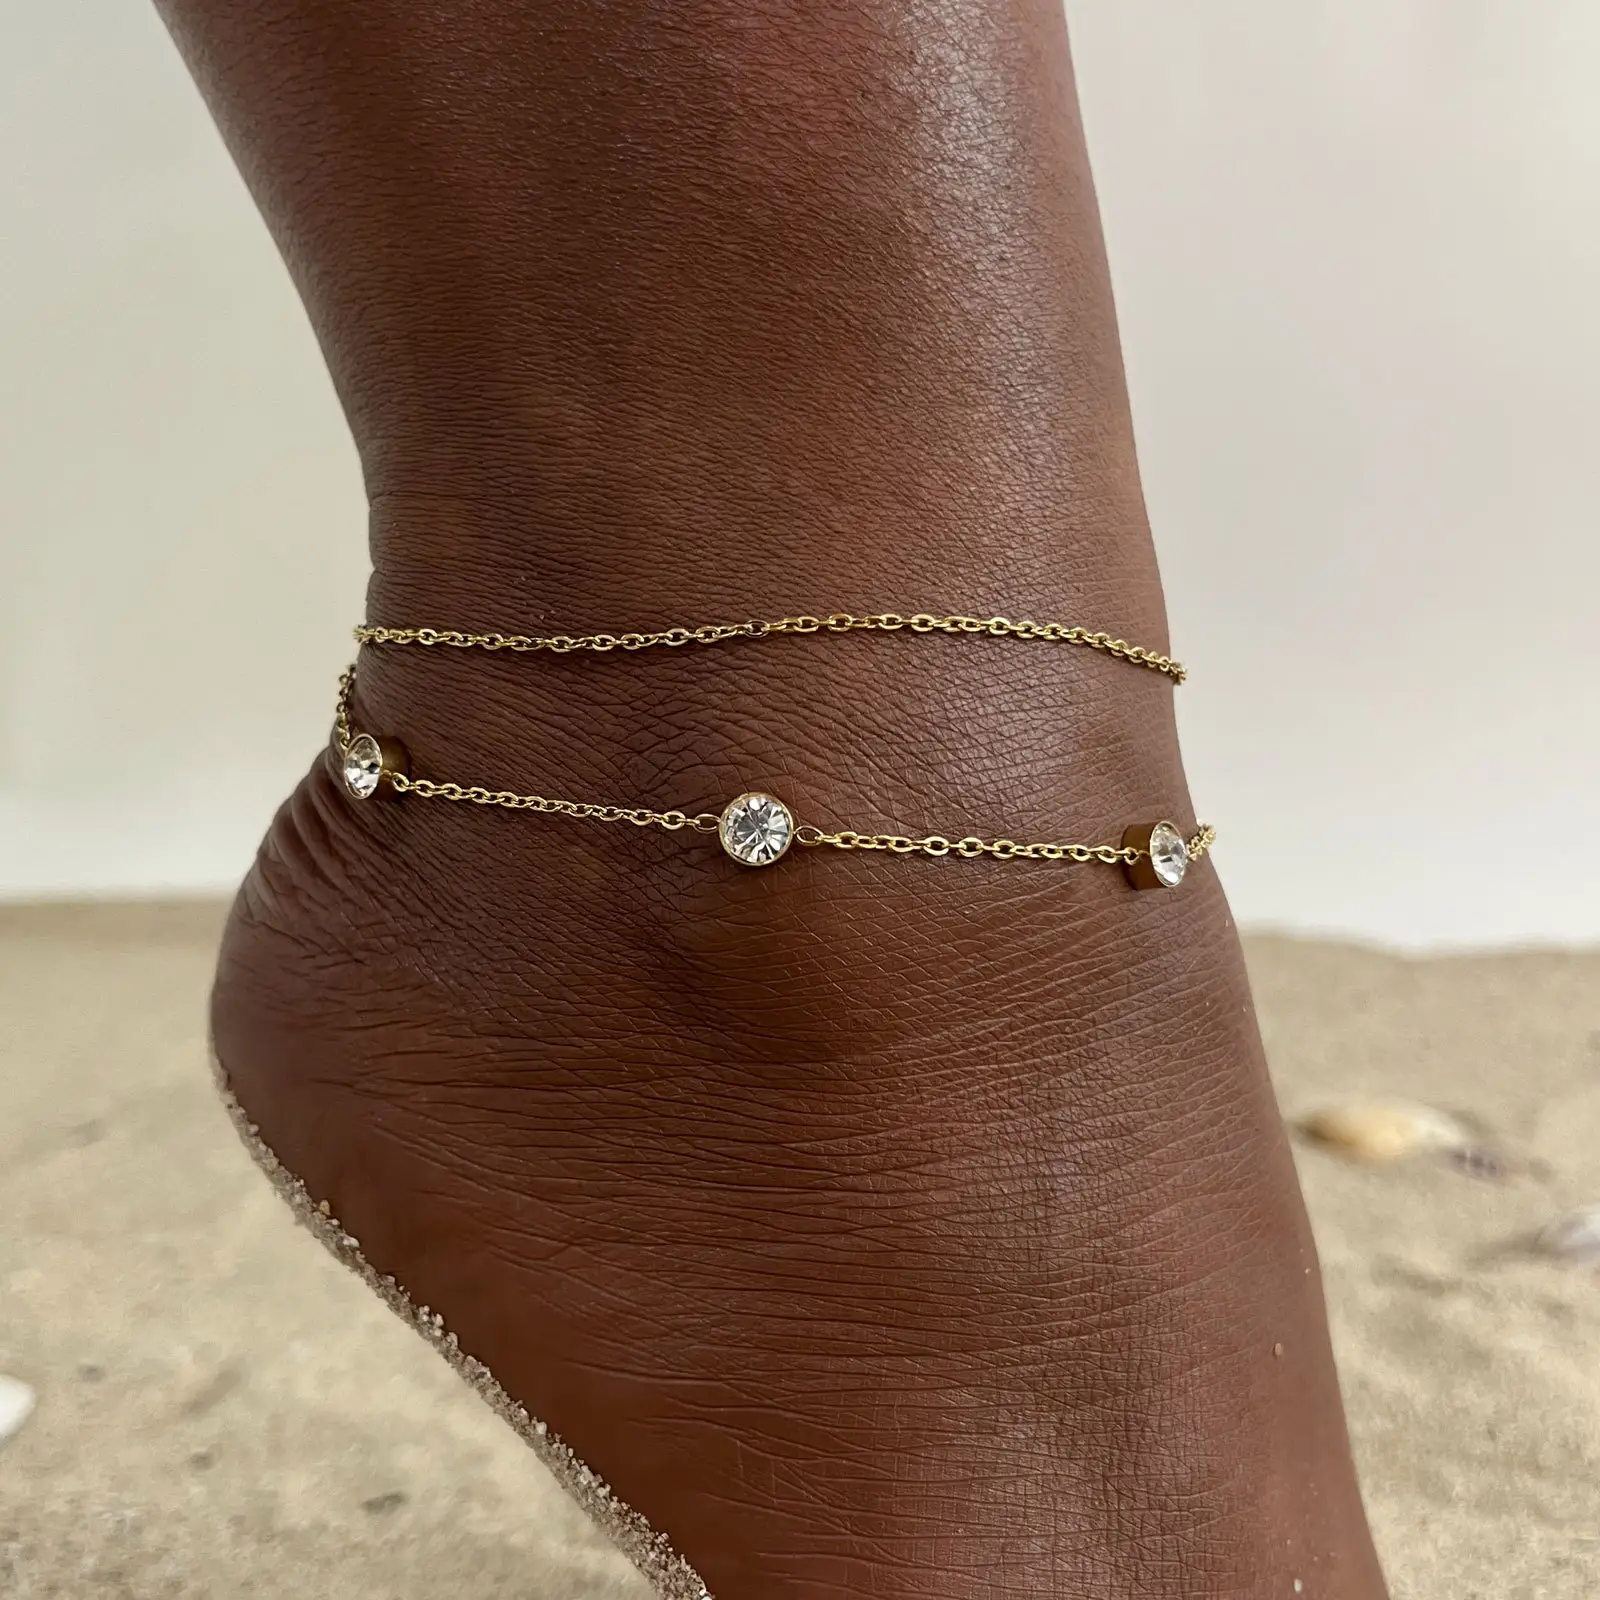 Fashion Multi-Layer Anklets Foot Jewelry Ankle Bracelet Dainty Beach Metal Chain Heart-Shaped Rice Bead Anklet Set For Women